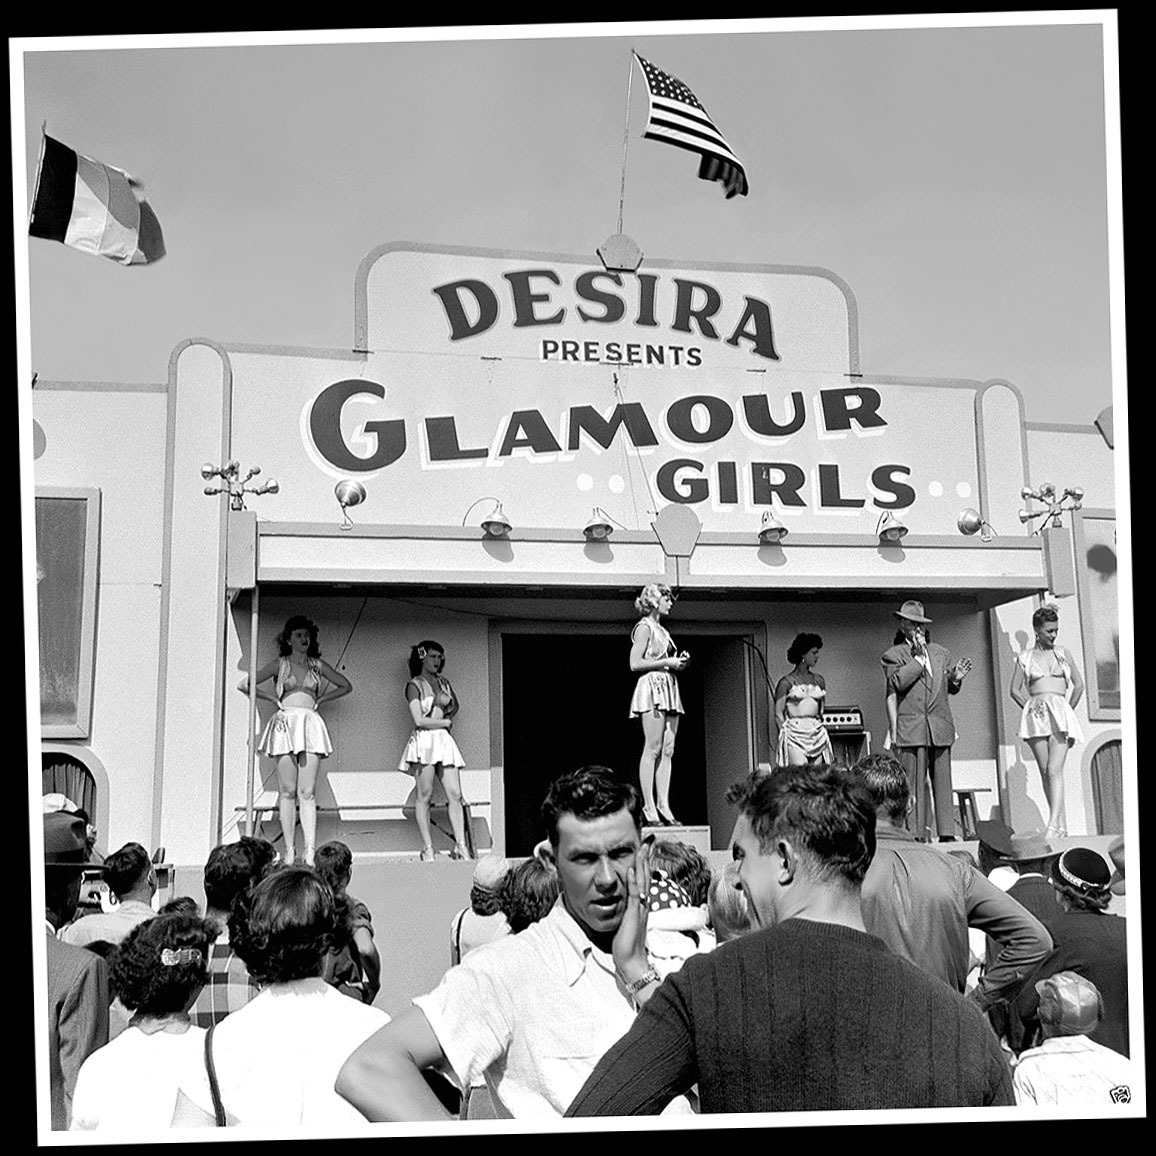 Vintage press photo taken at the 1951 ‘Texas State Fair’ features the Talker